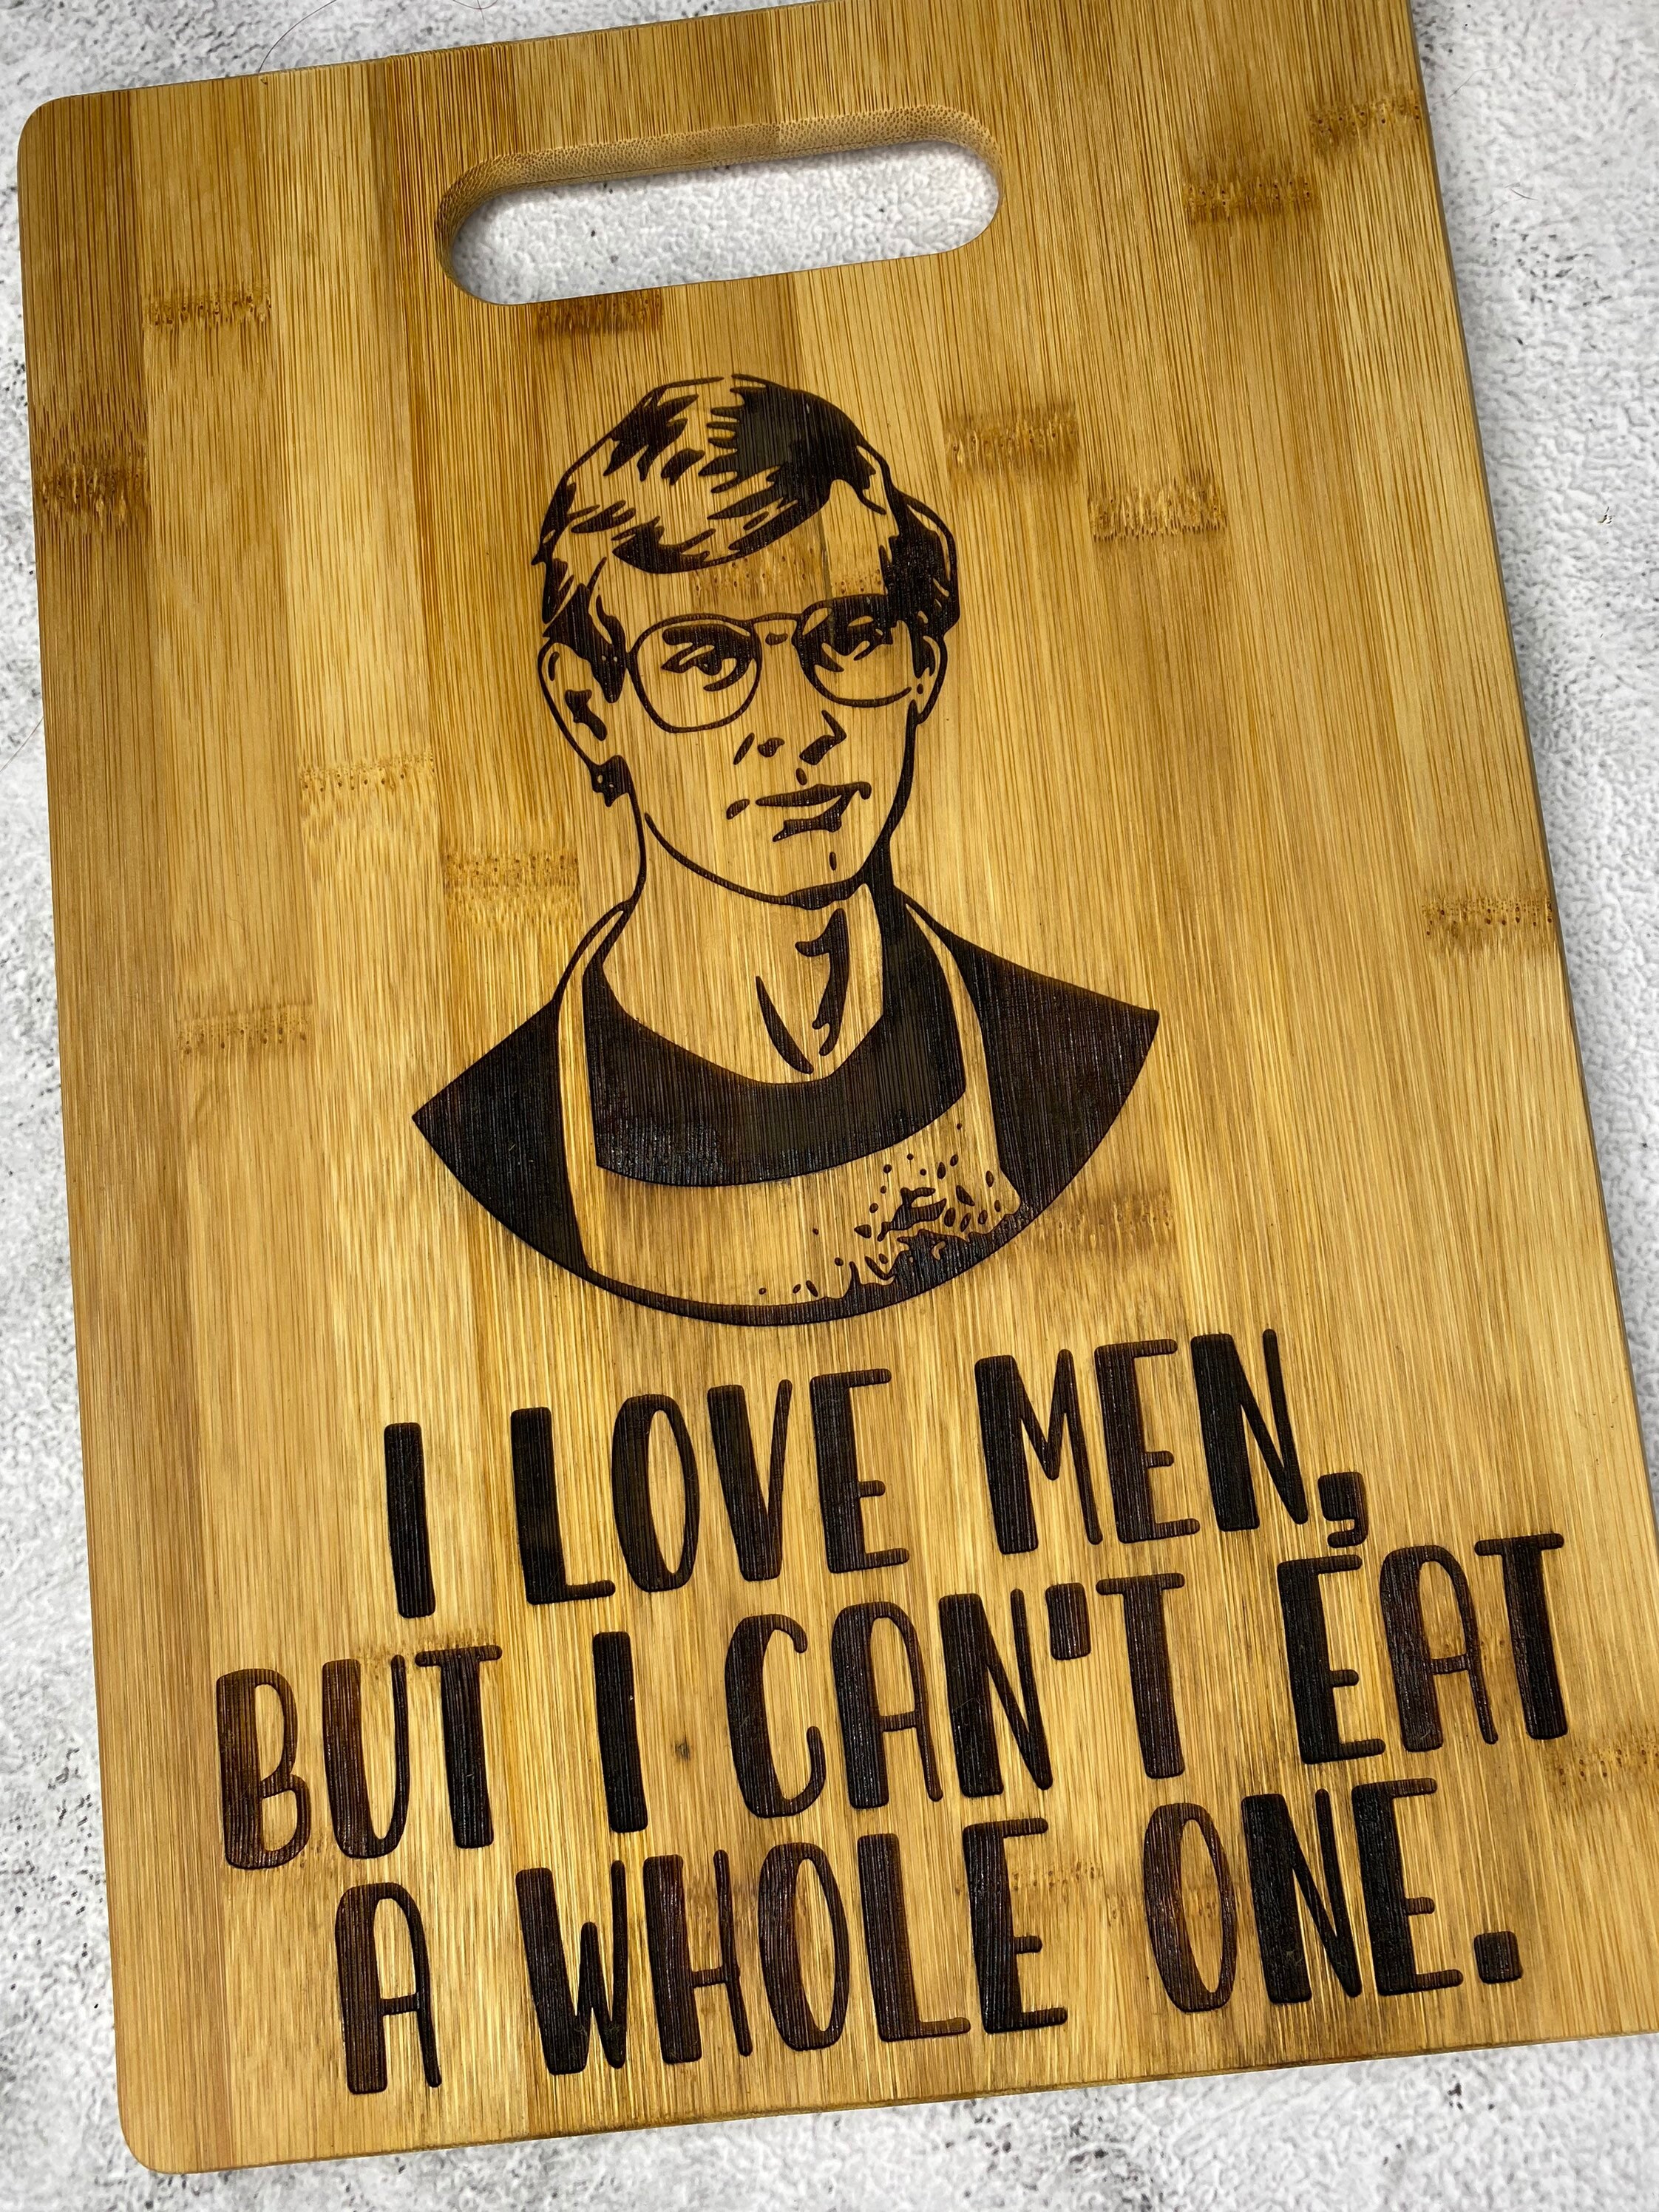 Jeffrey Dahmer Cutting Board I Love Men but I Cant image